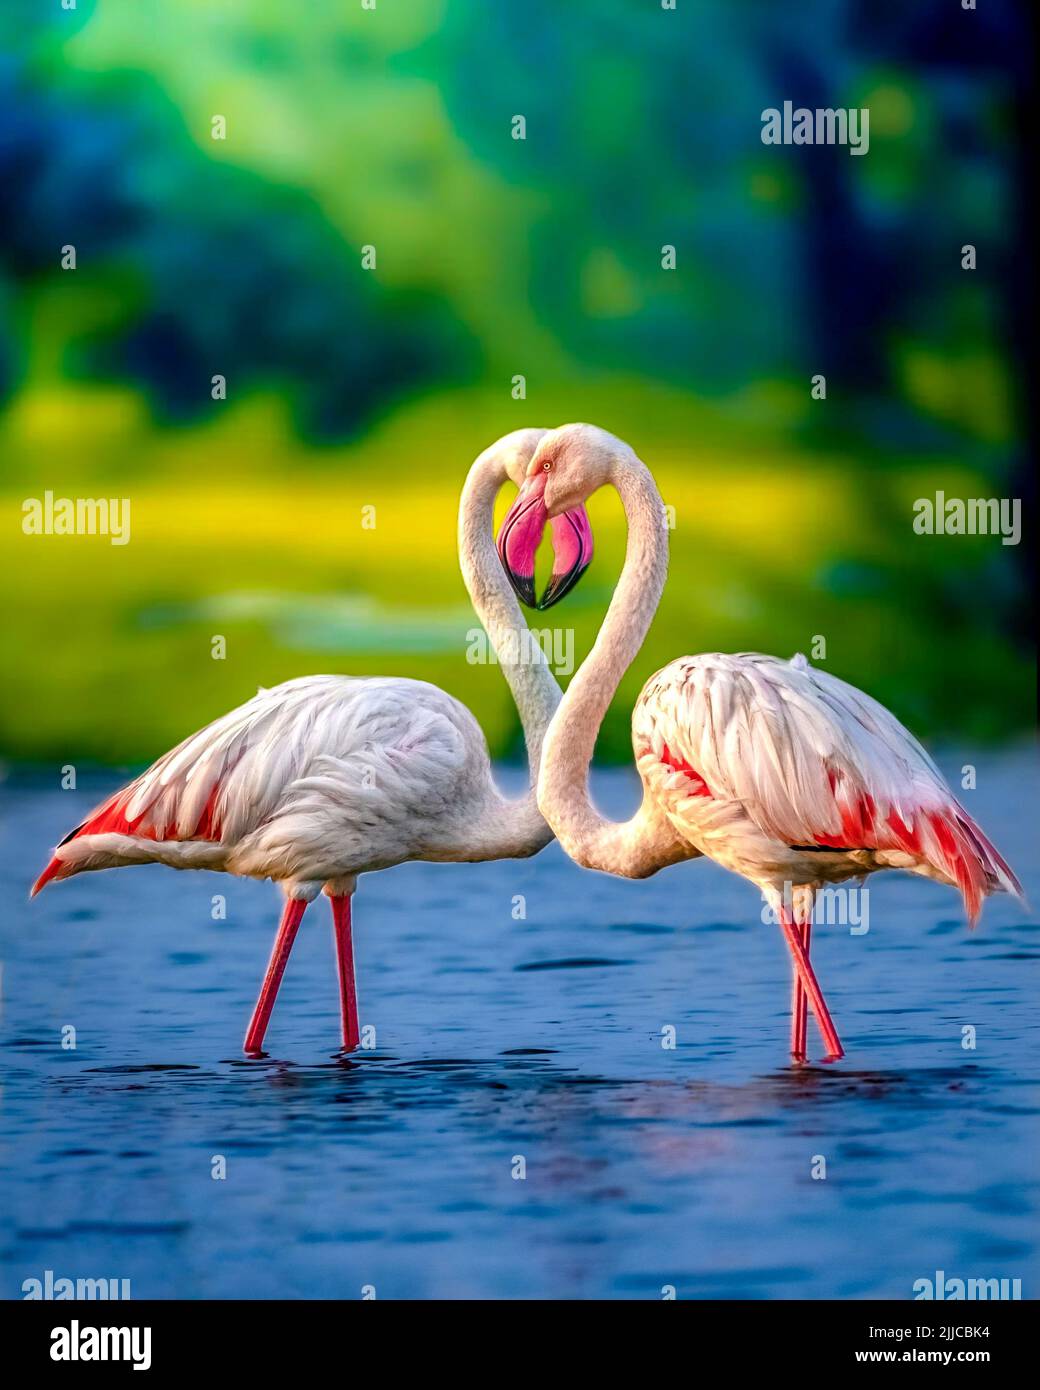 The two flamingos bow their head in a courting ritual. Bhima River, Maharashtra, India: THIS PAIR of flamingo dancers are captured during their iconic Stock Photo